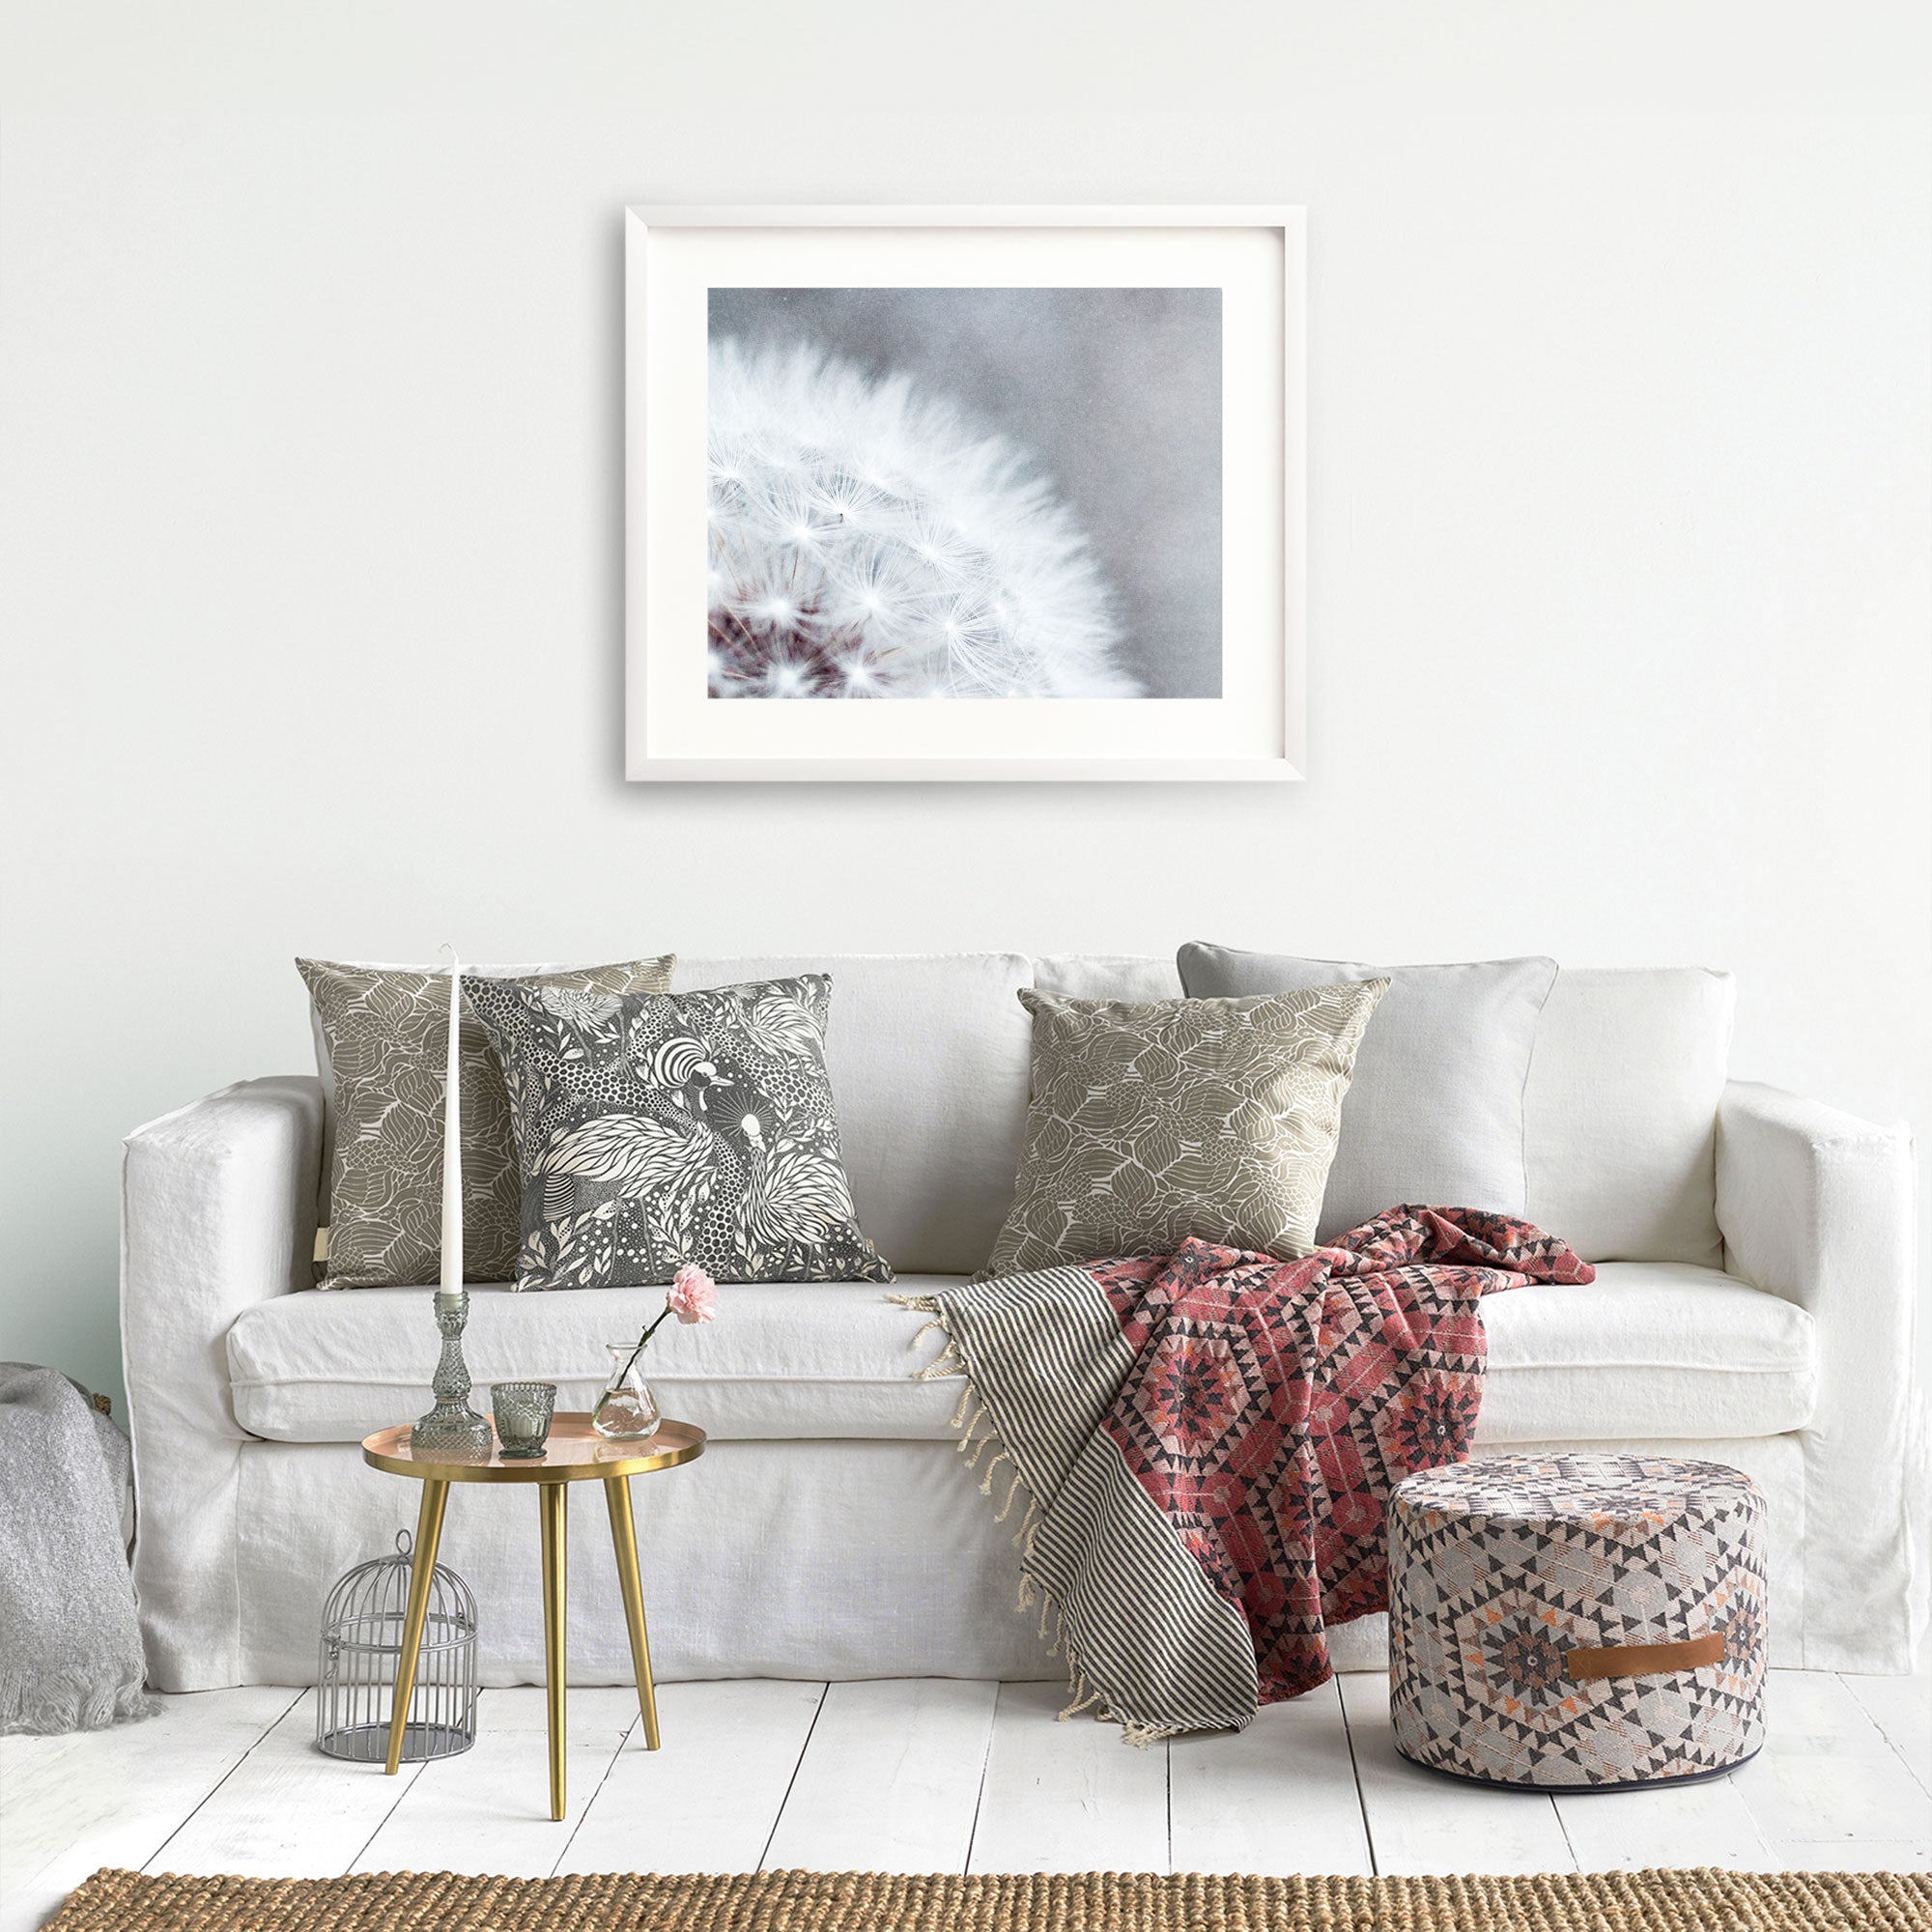 A cozy, inviting living room nook features a white sofa covered with decorative gray and beige pillows, a patterned red blanket, a small round table with books, flowers, and an Offley Green Grey Botanical Print, 'Dandelion Queen'.